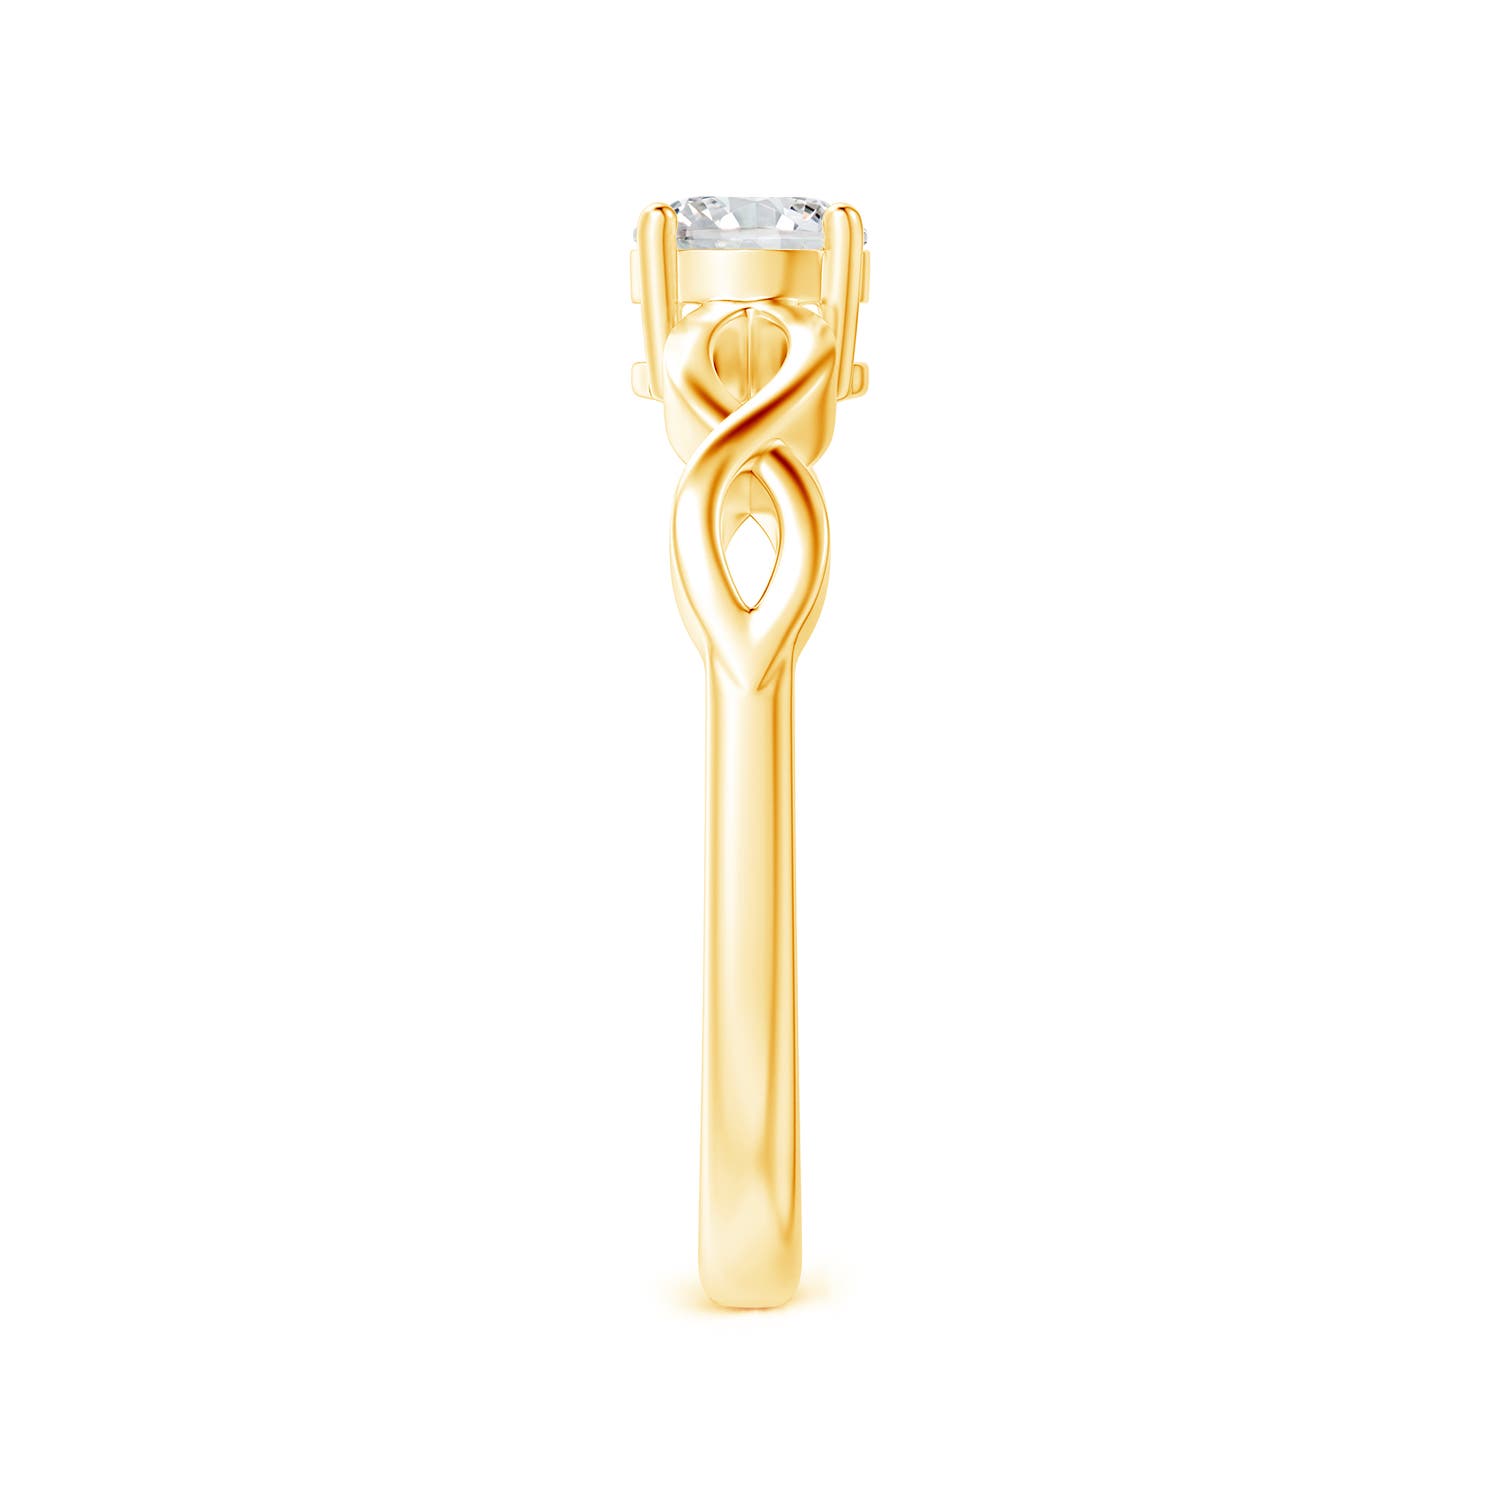 H, SI2 / 0.47 CT / 14 KT Yellow Gold